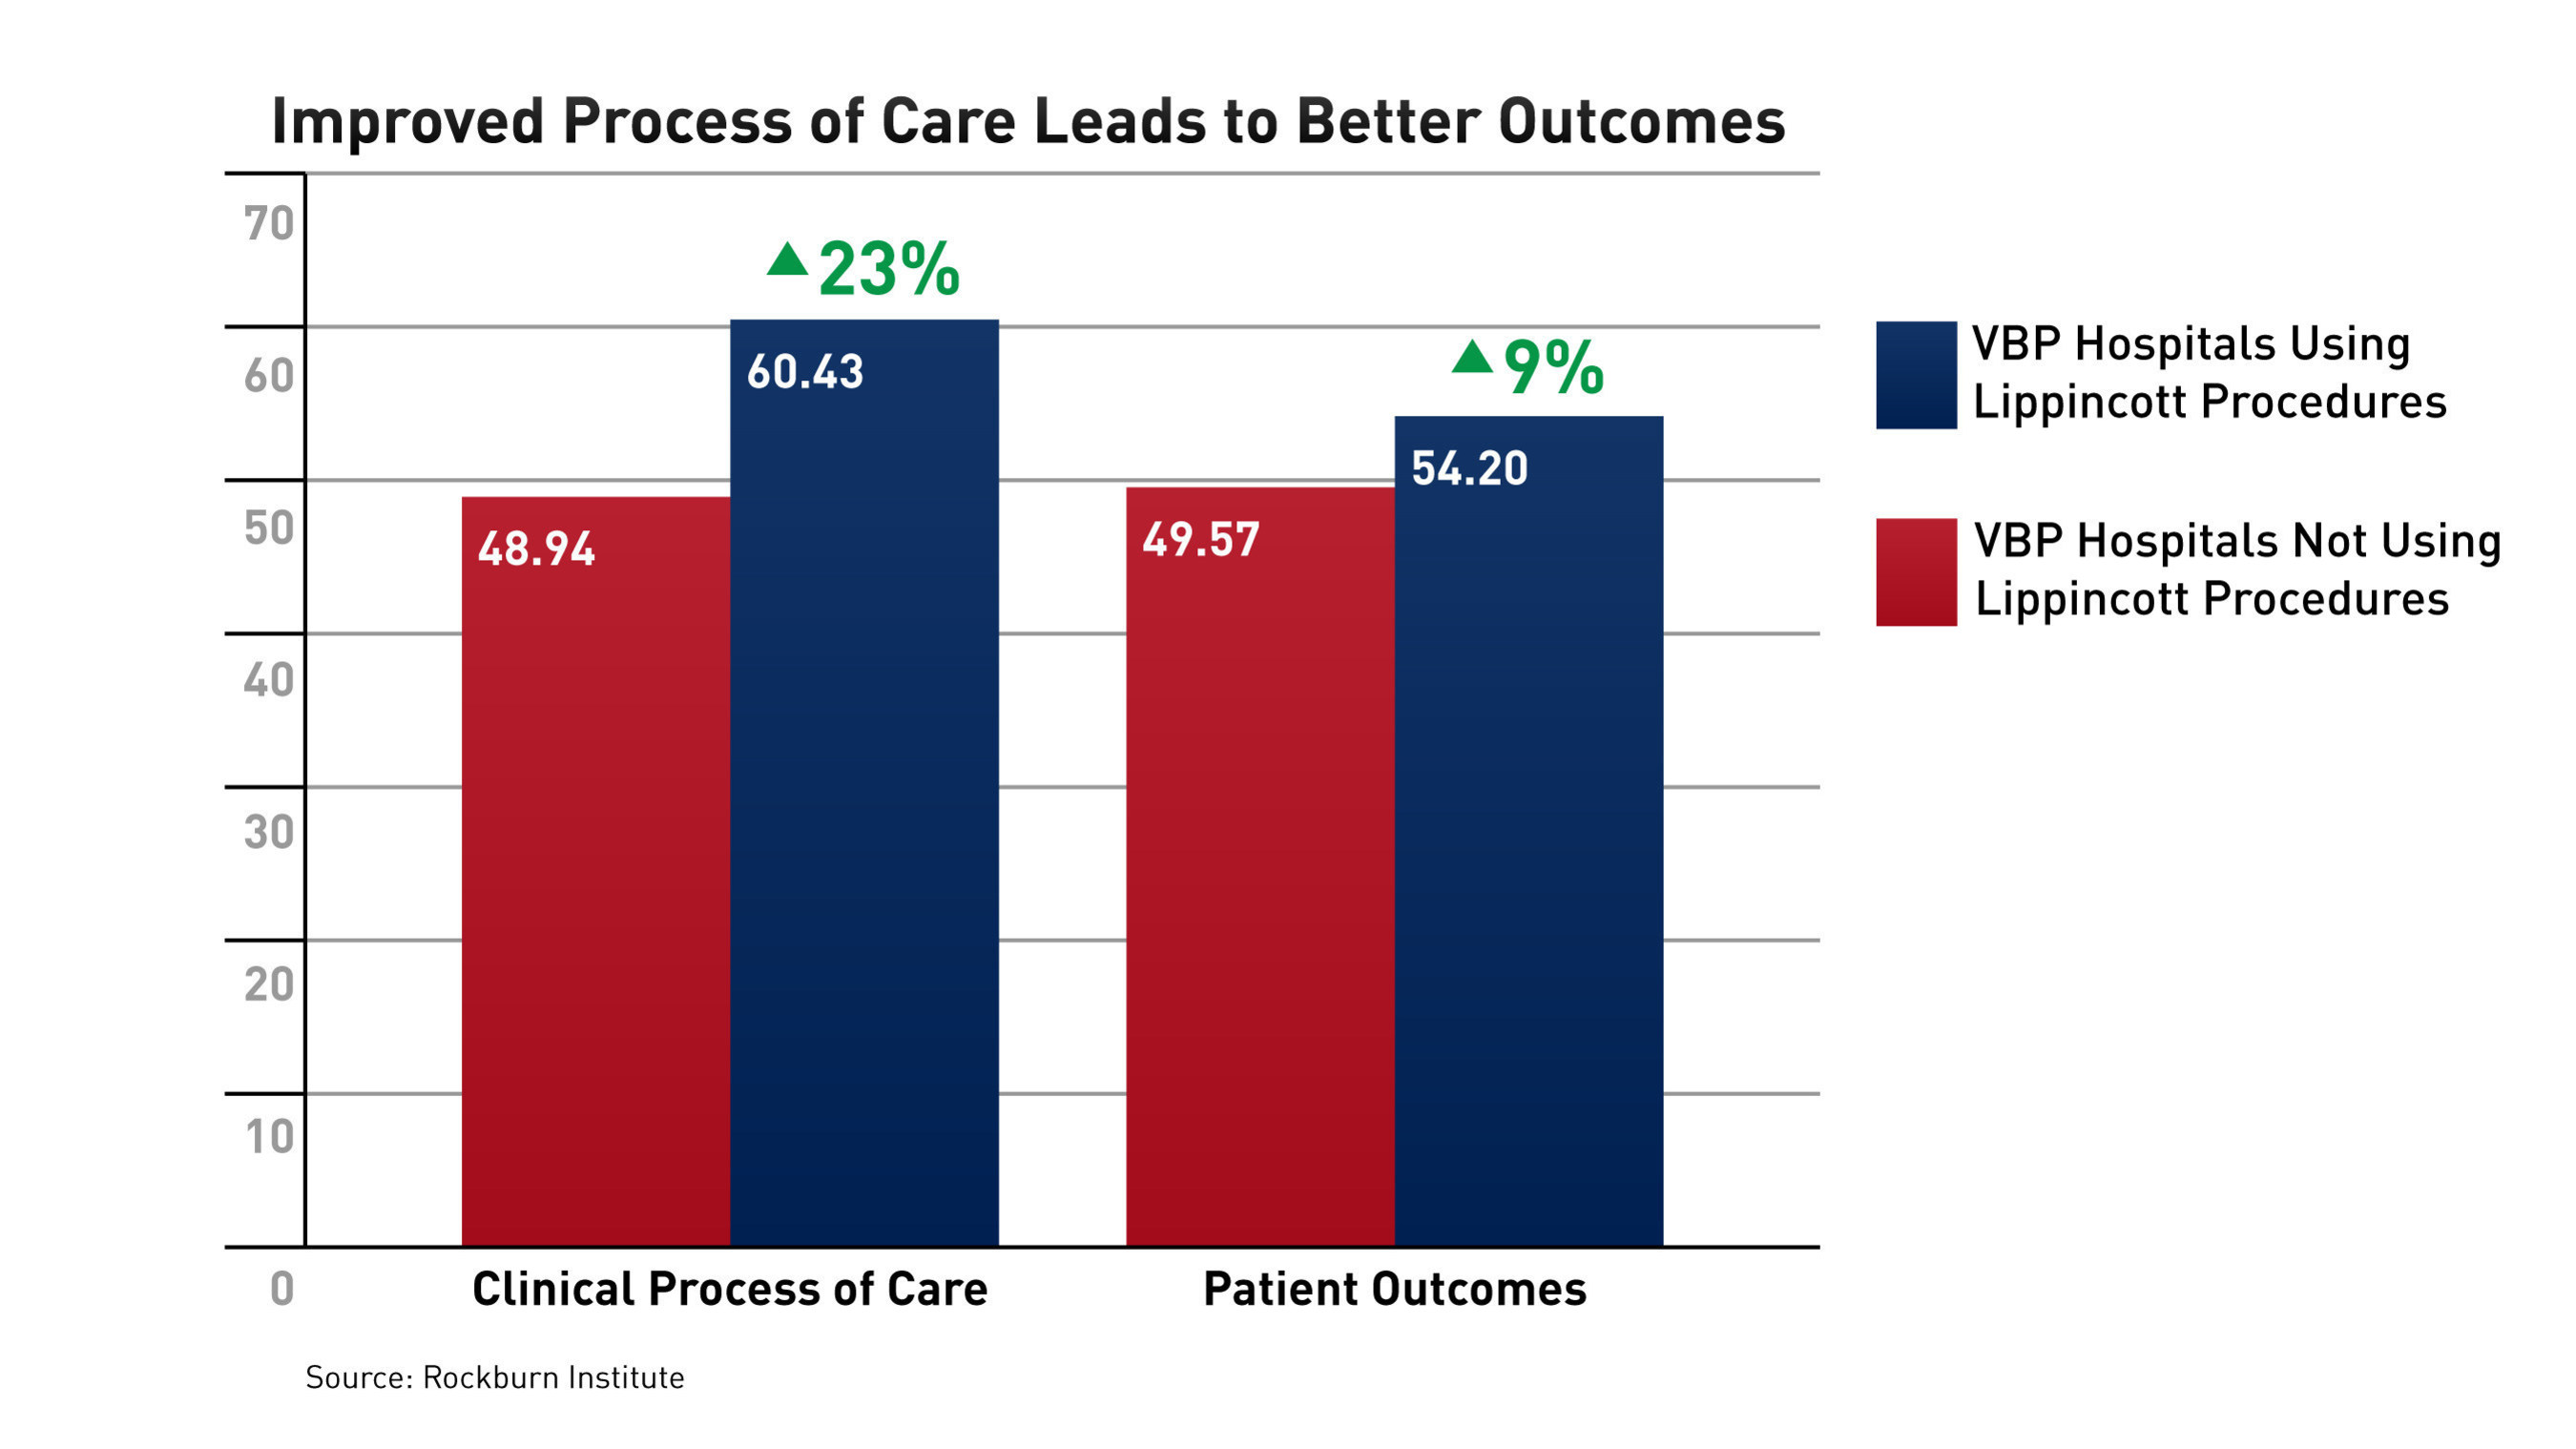 A new Rockburn Institute study finds that hospitals using Lippincott Procedures are correlated with higher overall CMS Value-based Purchasing (VBP) domain ranks. According to the study, hospitals in the VBP program that use Lippincott Procedures performed 23 percent better in the median Clinical Process of Care Score and 9 percent better in Patient Outcomes.